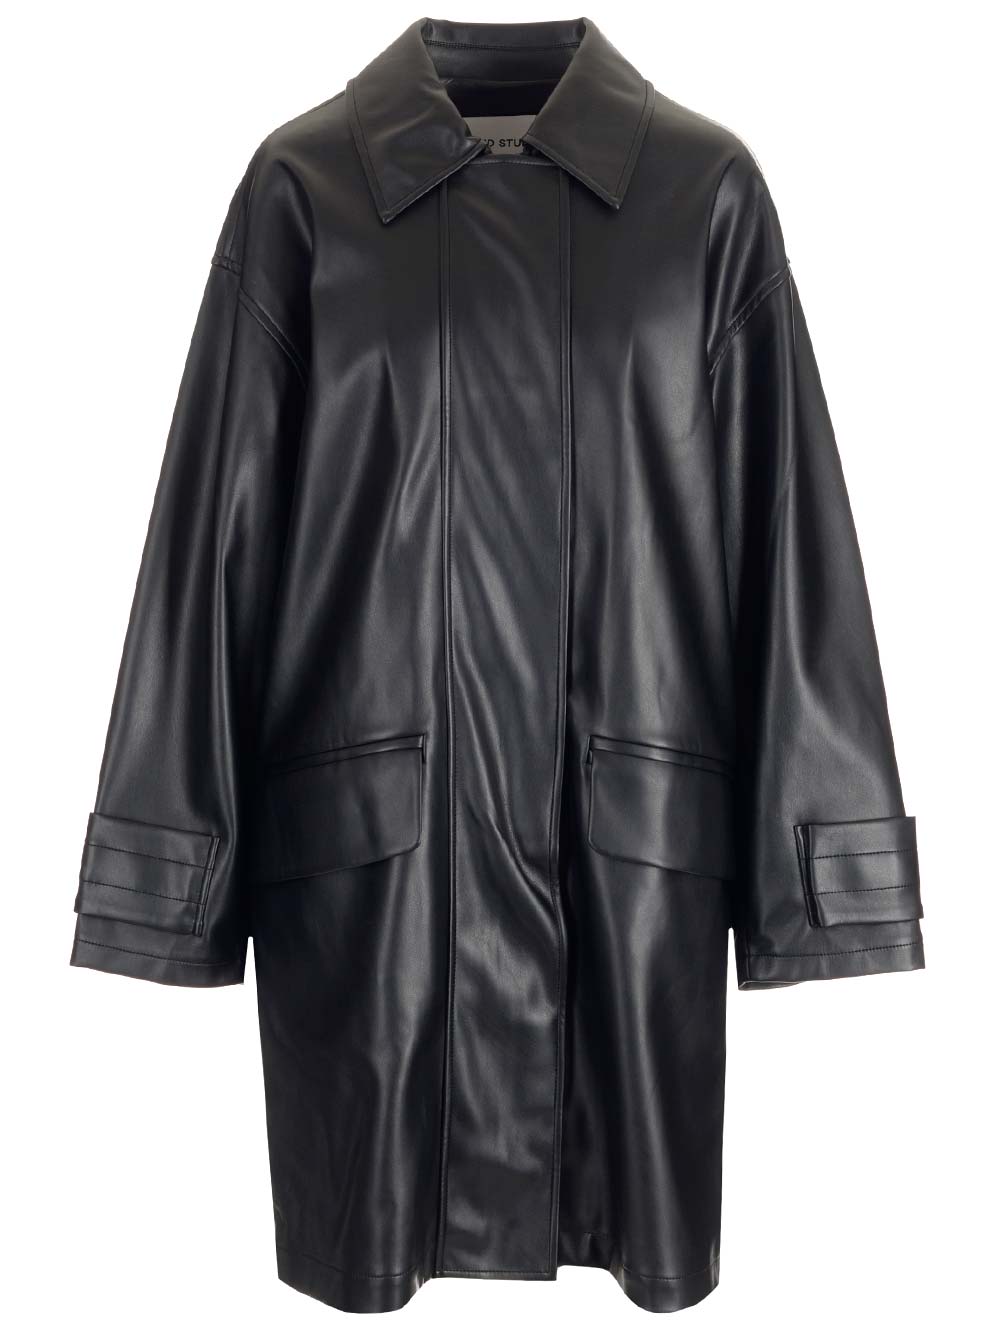 STAND STUDIO CONNIE LEATHER-EFFECT COAT